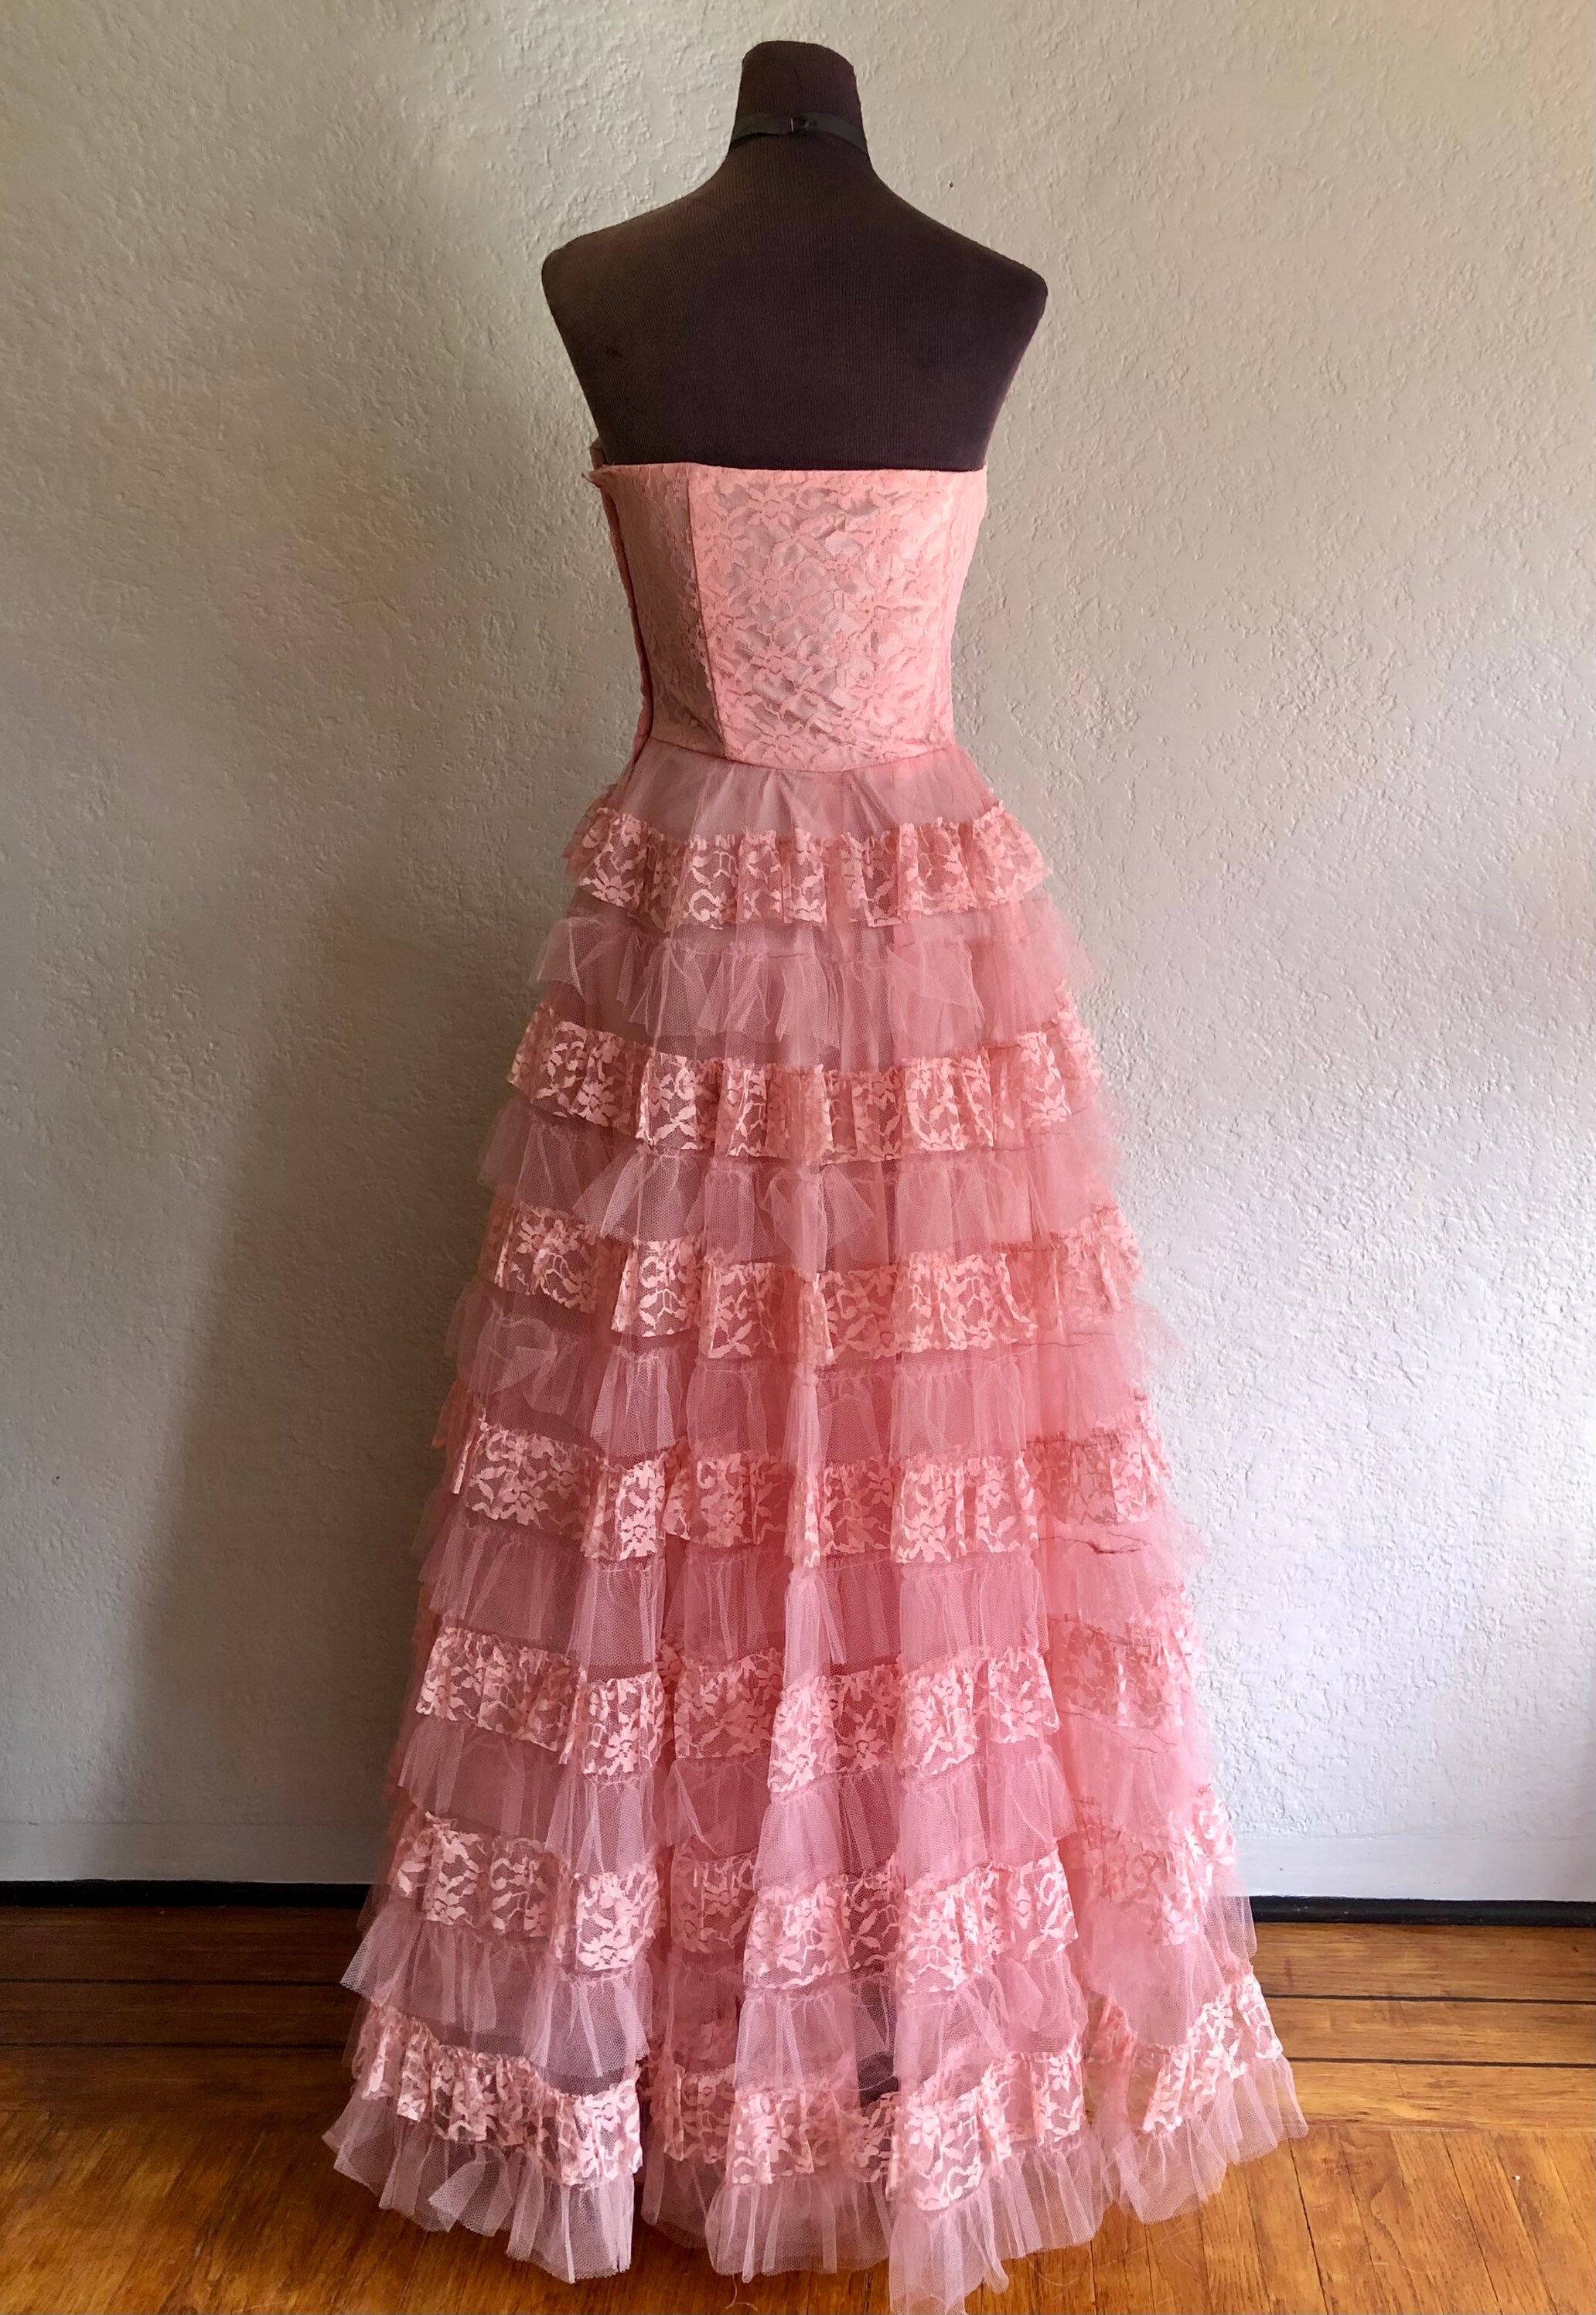 Vintage 1950s Strapless Pink Tulle Dress Prom Gown - Etsy